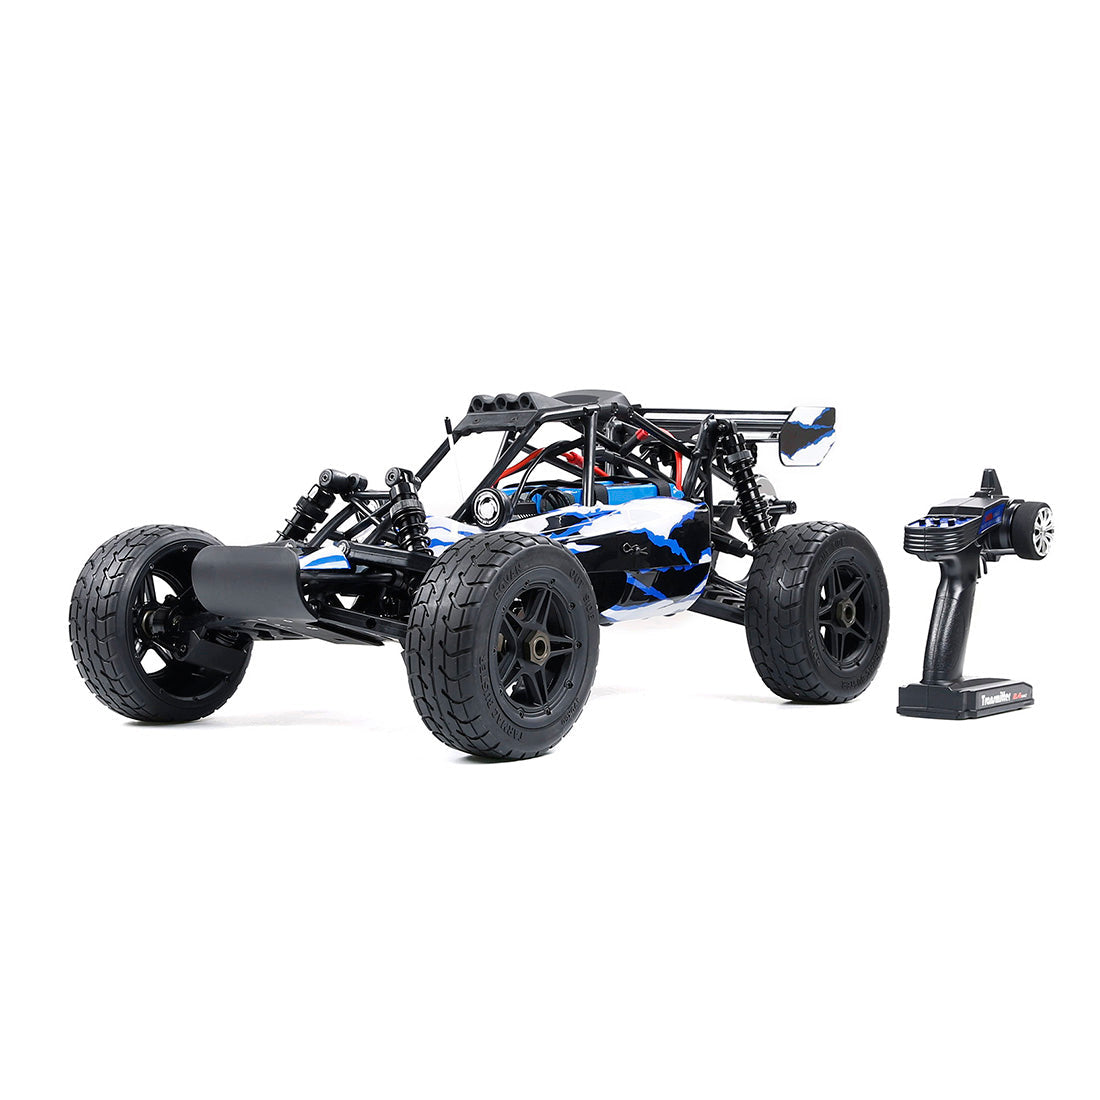 ROFUN EQ6 1/6 90+KM/H 2WD Rear Drive Brushless Off-road Vehicle 2.4G RC High Speed Model Car without Battery and Charger